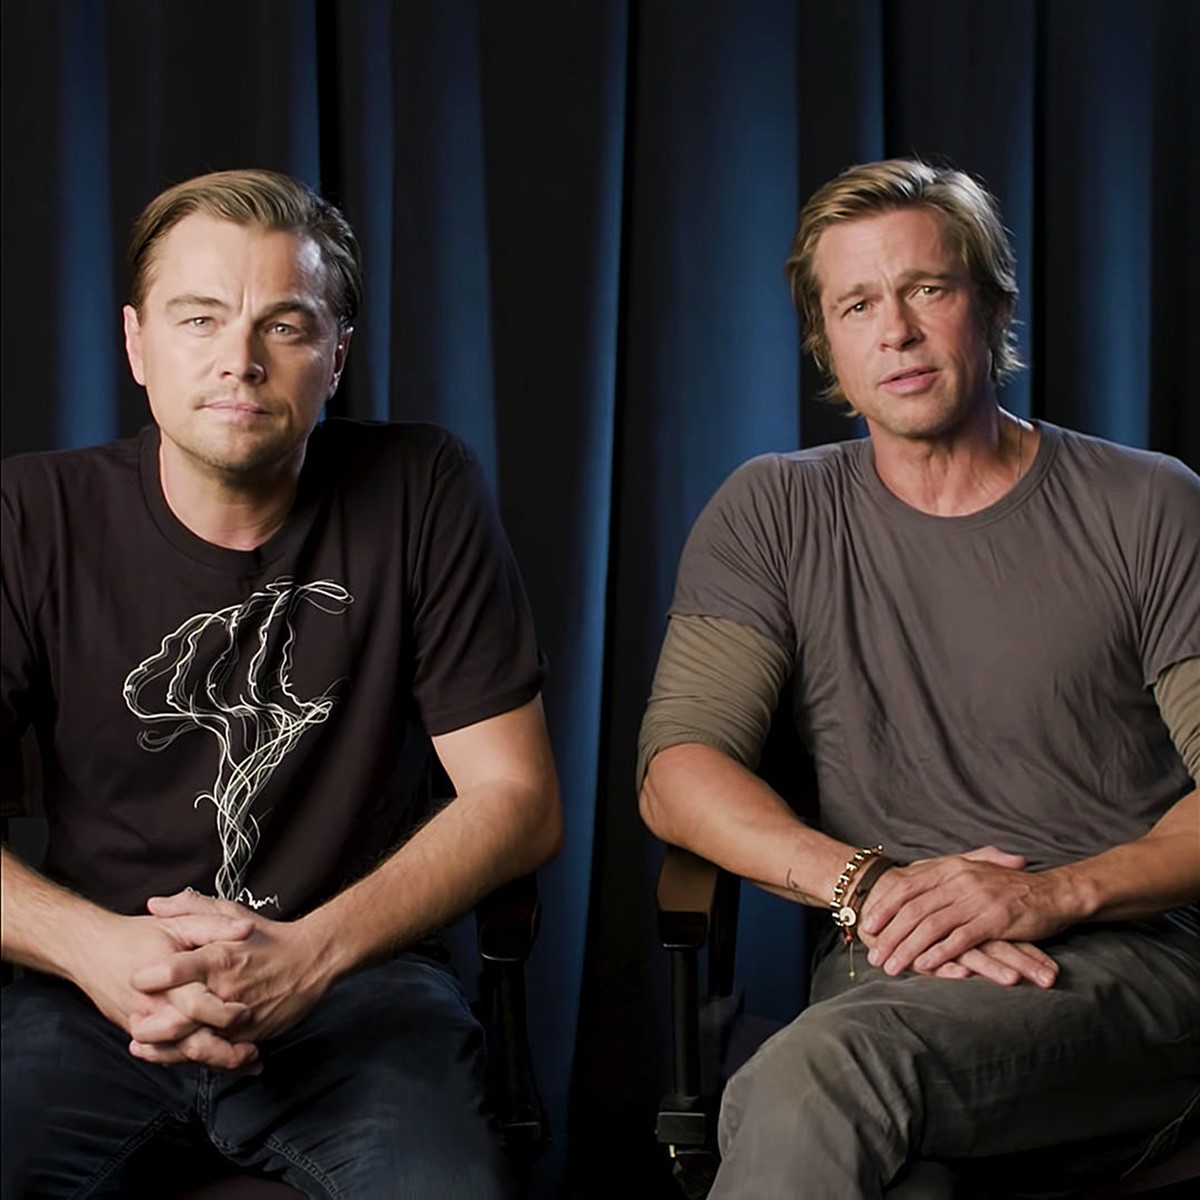 Photo of Brad Pitt sitting next to Leonardo DiCaprio who is wearing the Don't Let Them Disappear campaign t-shirt. Client: Jane Goodall Institute and Dicaprio Foundation.